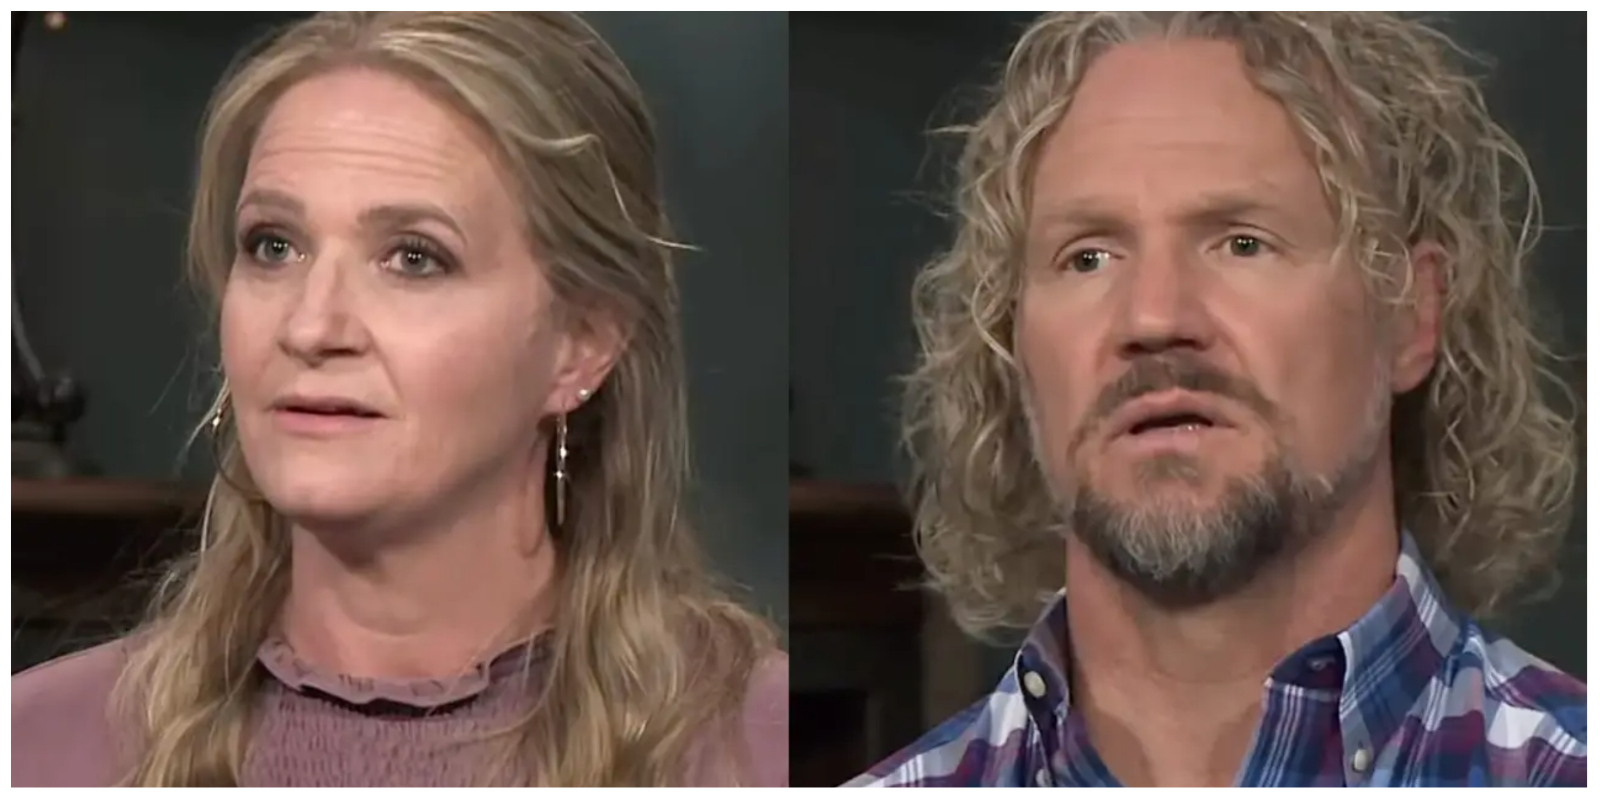 Christine and Kody Brown in side by side photographs taken during their TLC confessionals.